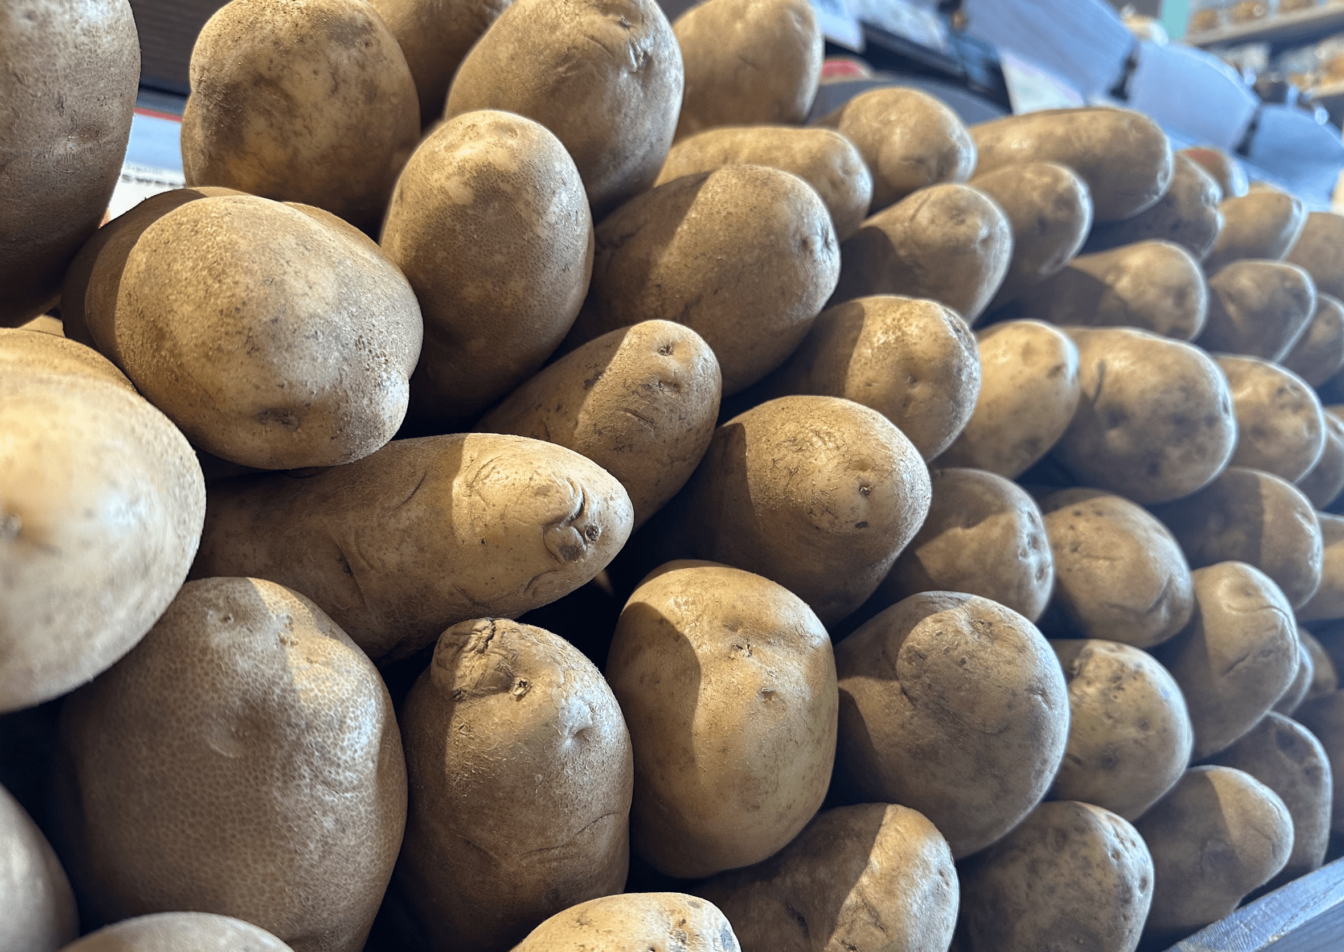 Wisconsin Potato Council promises more research, better production